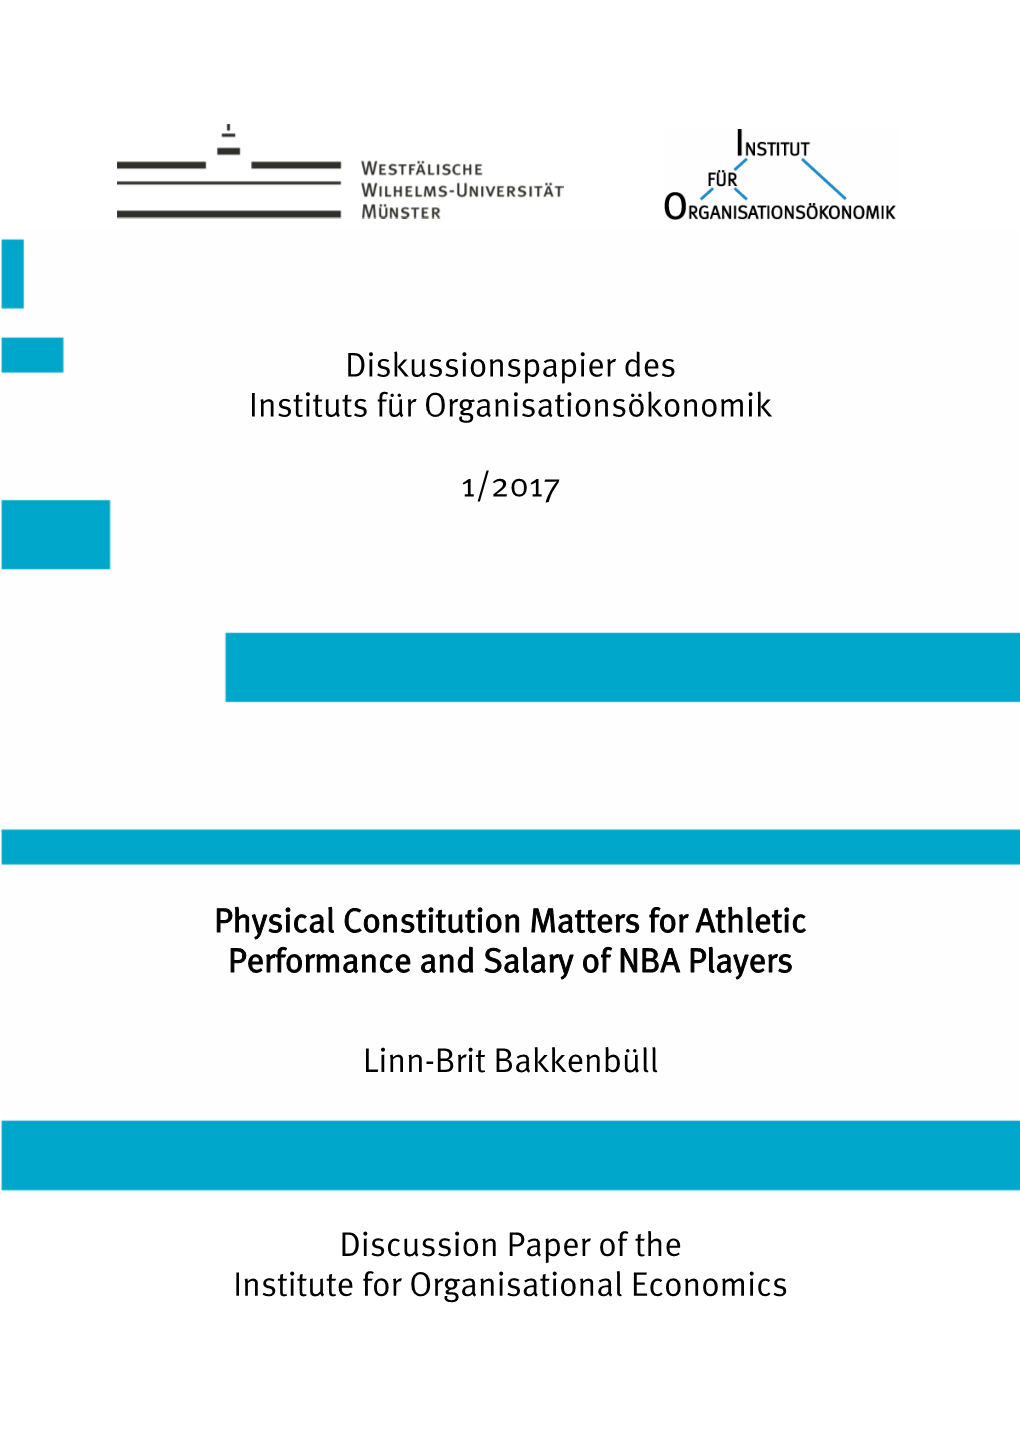 Physical Constitution Matters for Athletic Performance and Salary of NBA Players